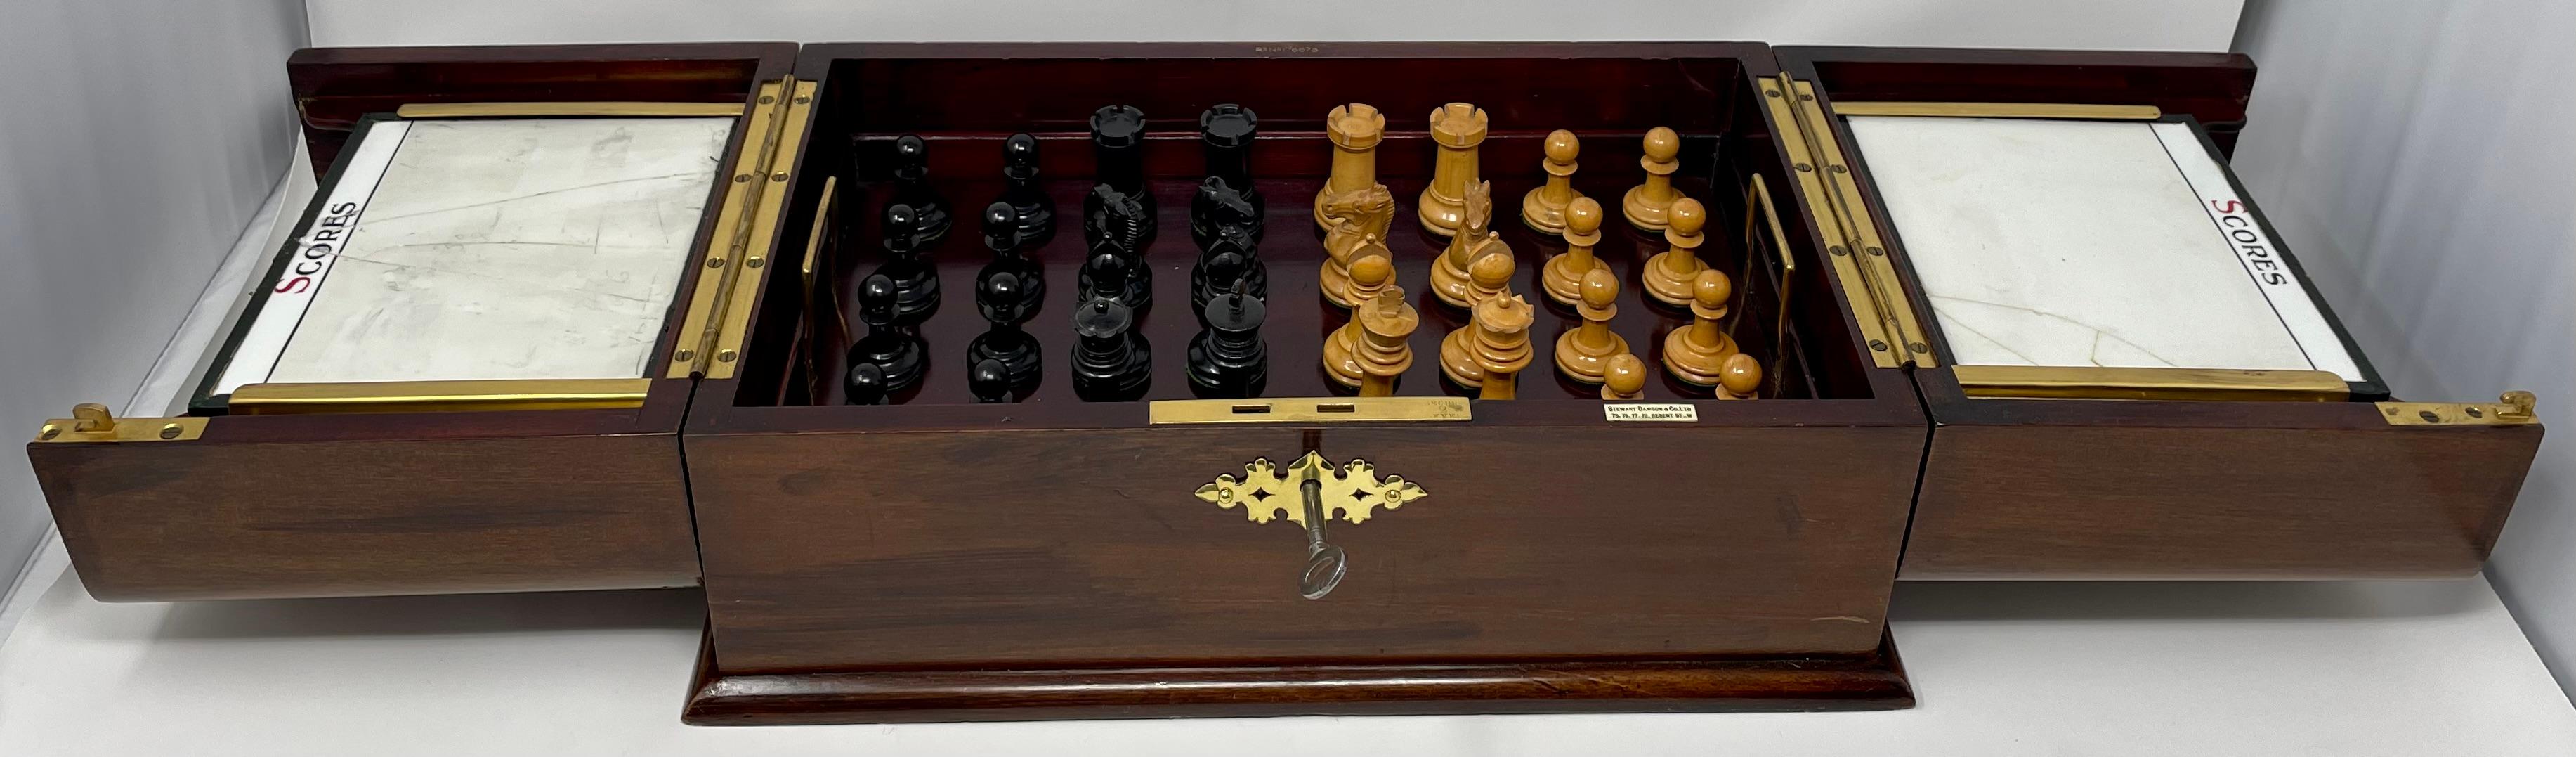 19th Century Antique English Mahogany and Brass Signed Games Box Compendium, Circa 1880. For Sale